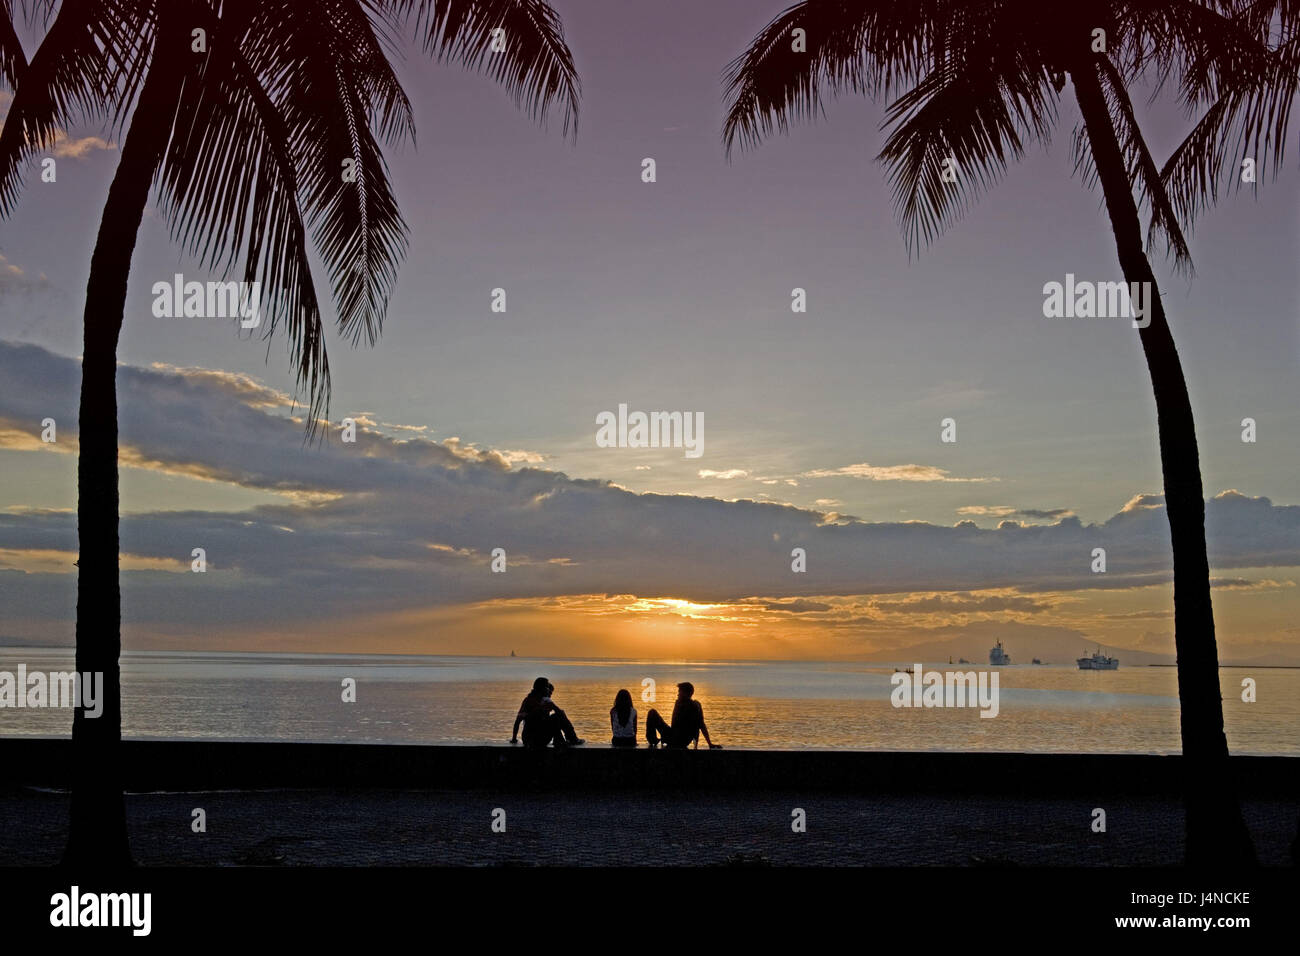 The Philippines, island Luzon, Manila, Manila Bay, palms, tourists, silhouette, sundown, destination, sea, sea view, view, palm beach, fantastically, dream vacation, beach vacation, afterglow, atmospheric, people, vacationers, romanticism, Stock Photo